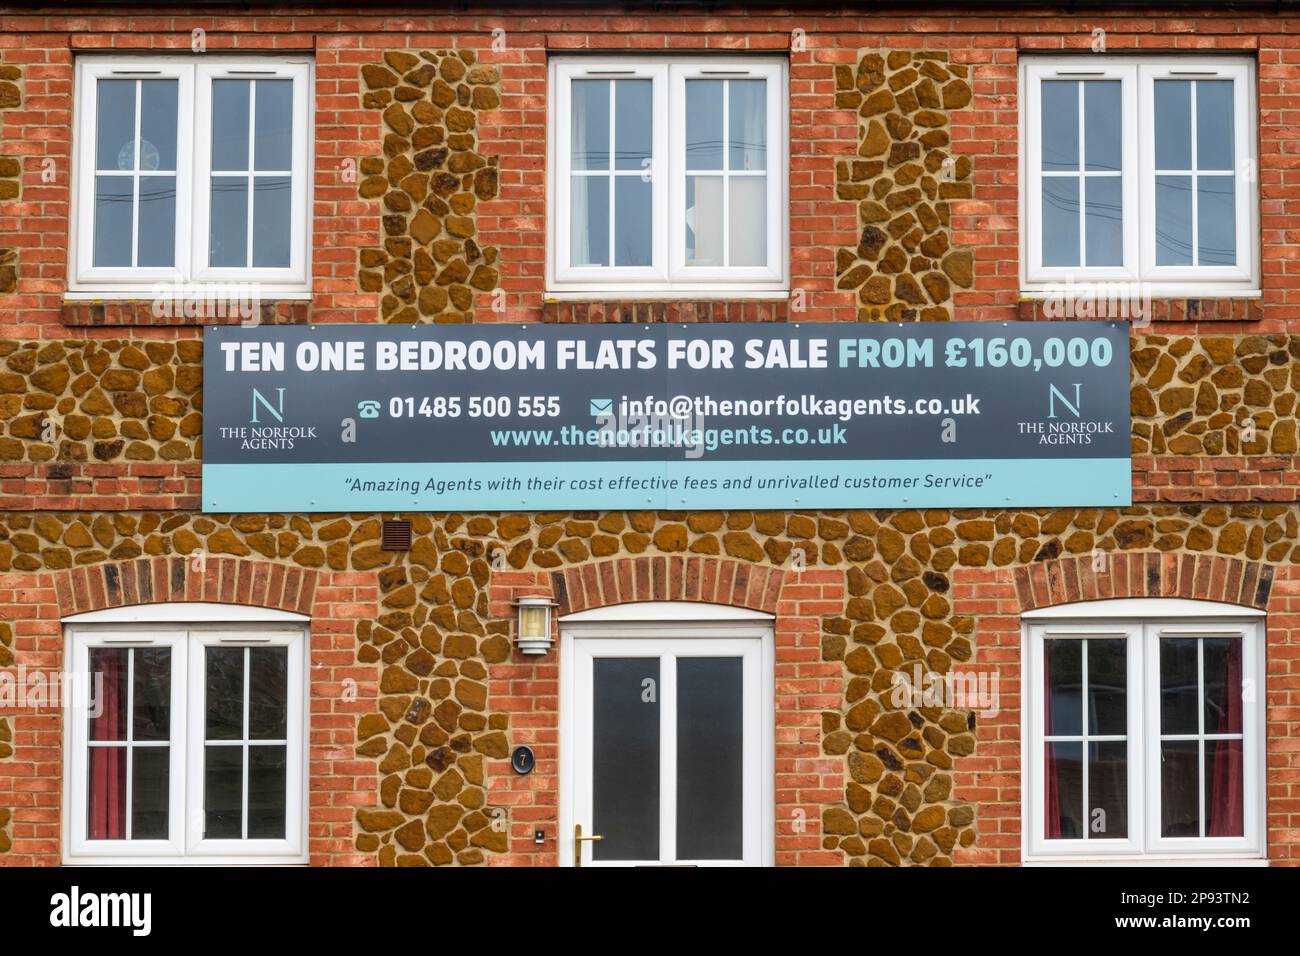 Ten One Bedroom Flats For Sale sign on building in Norfolk village. Stock Photo